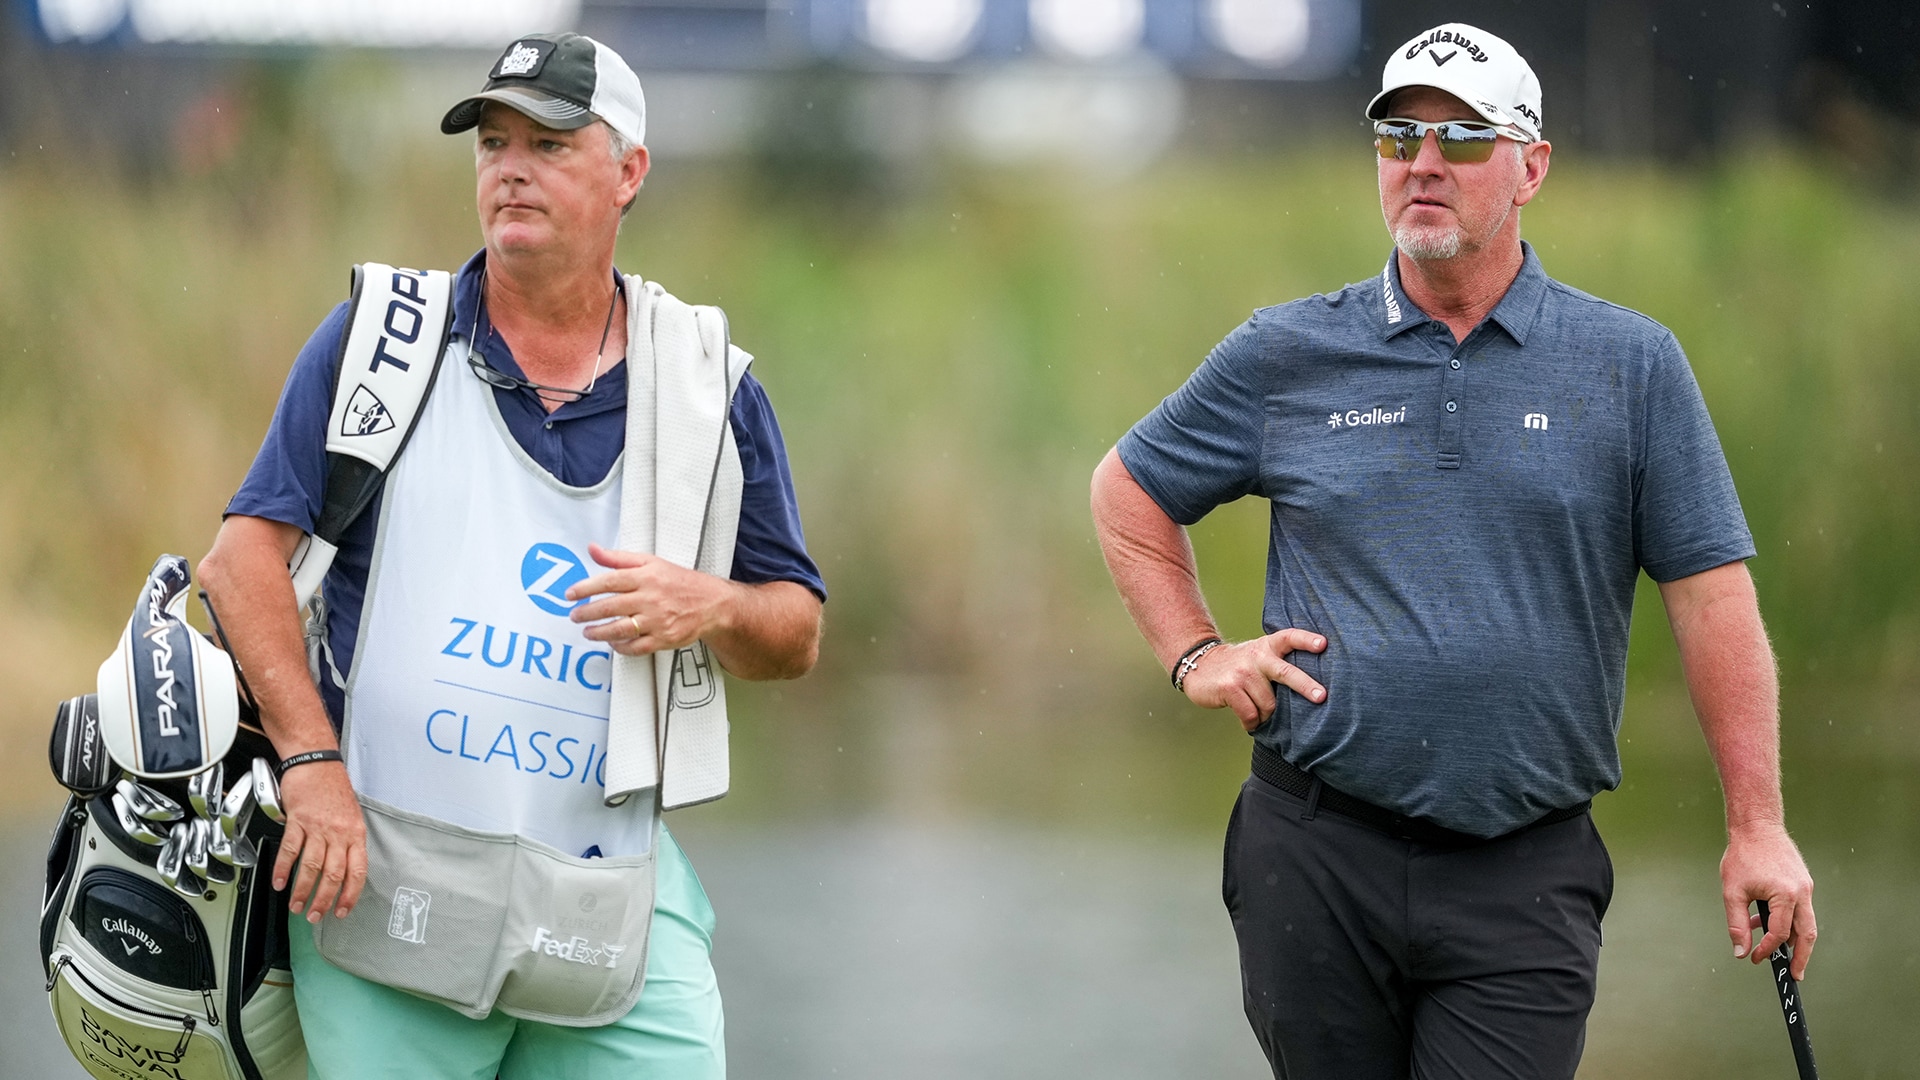 David Duval says Zurich appearance taught him, ‘I don’t belong out there any longer’